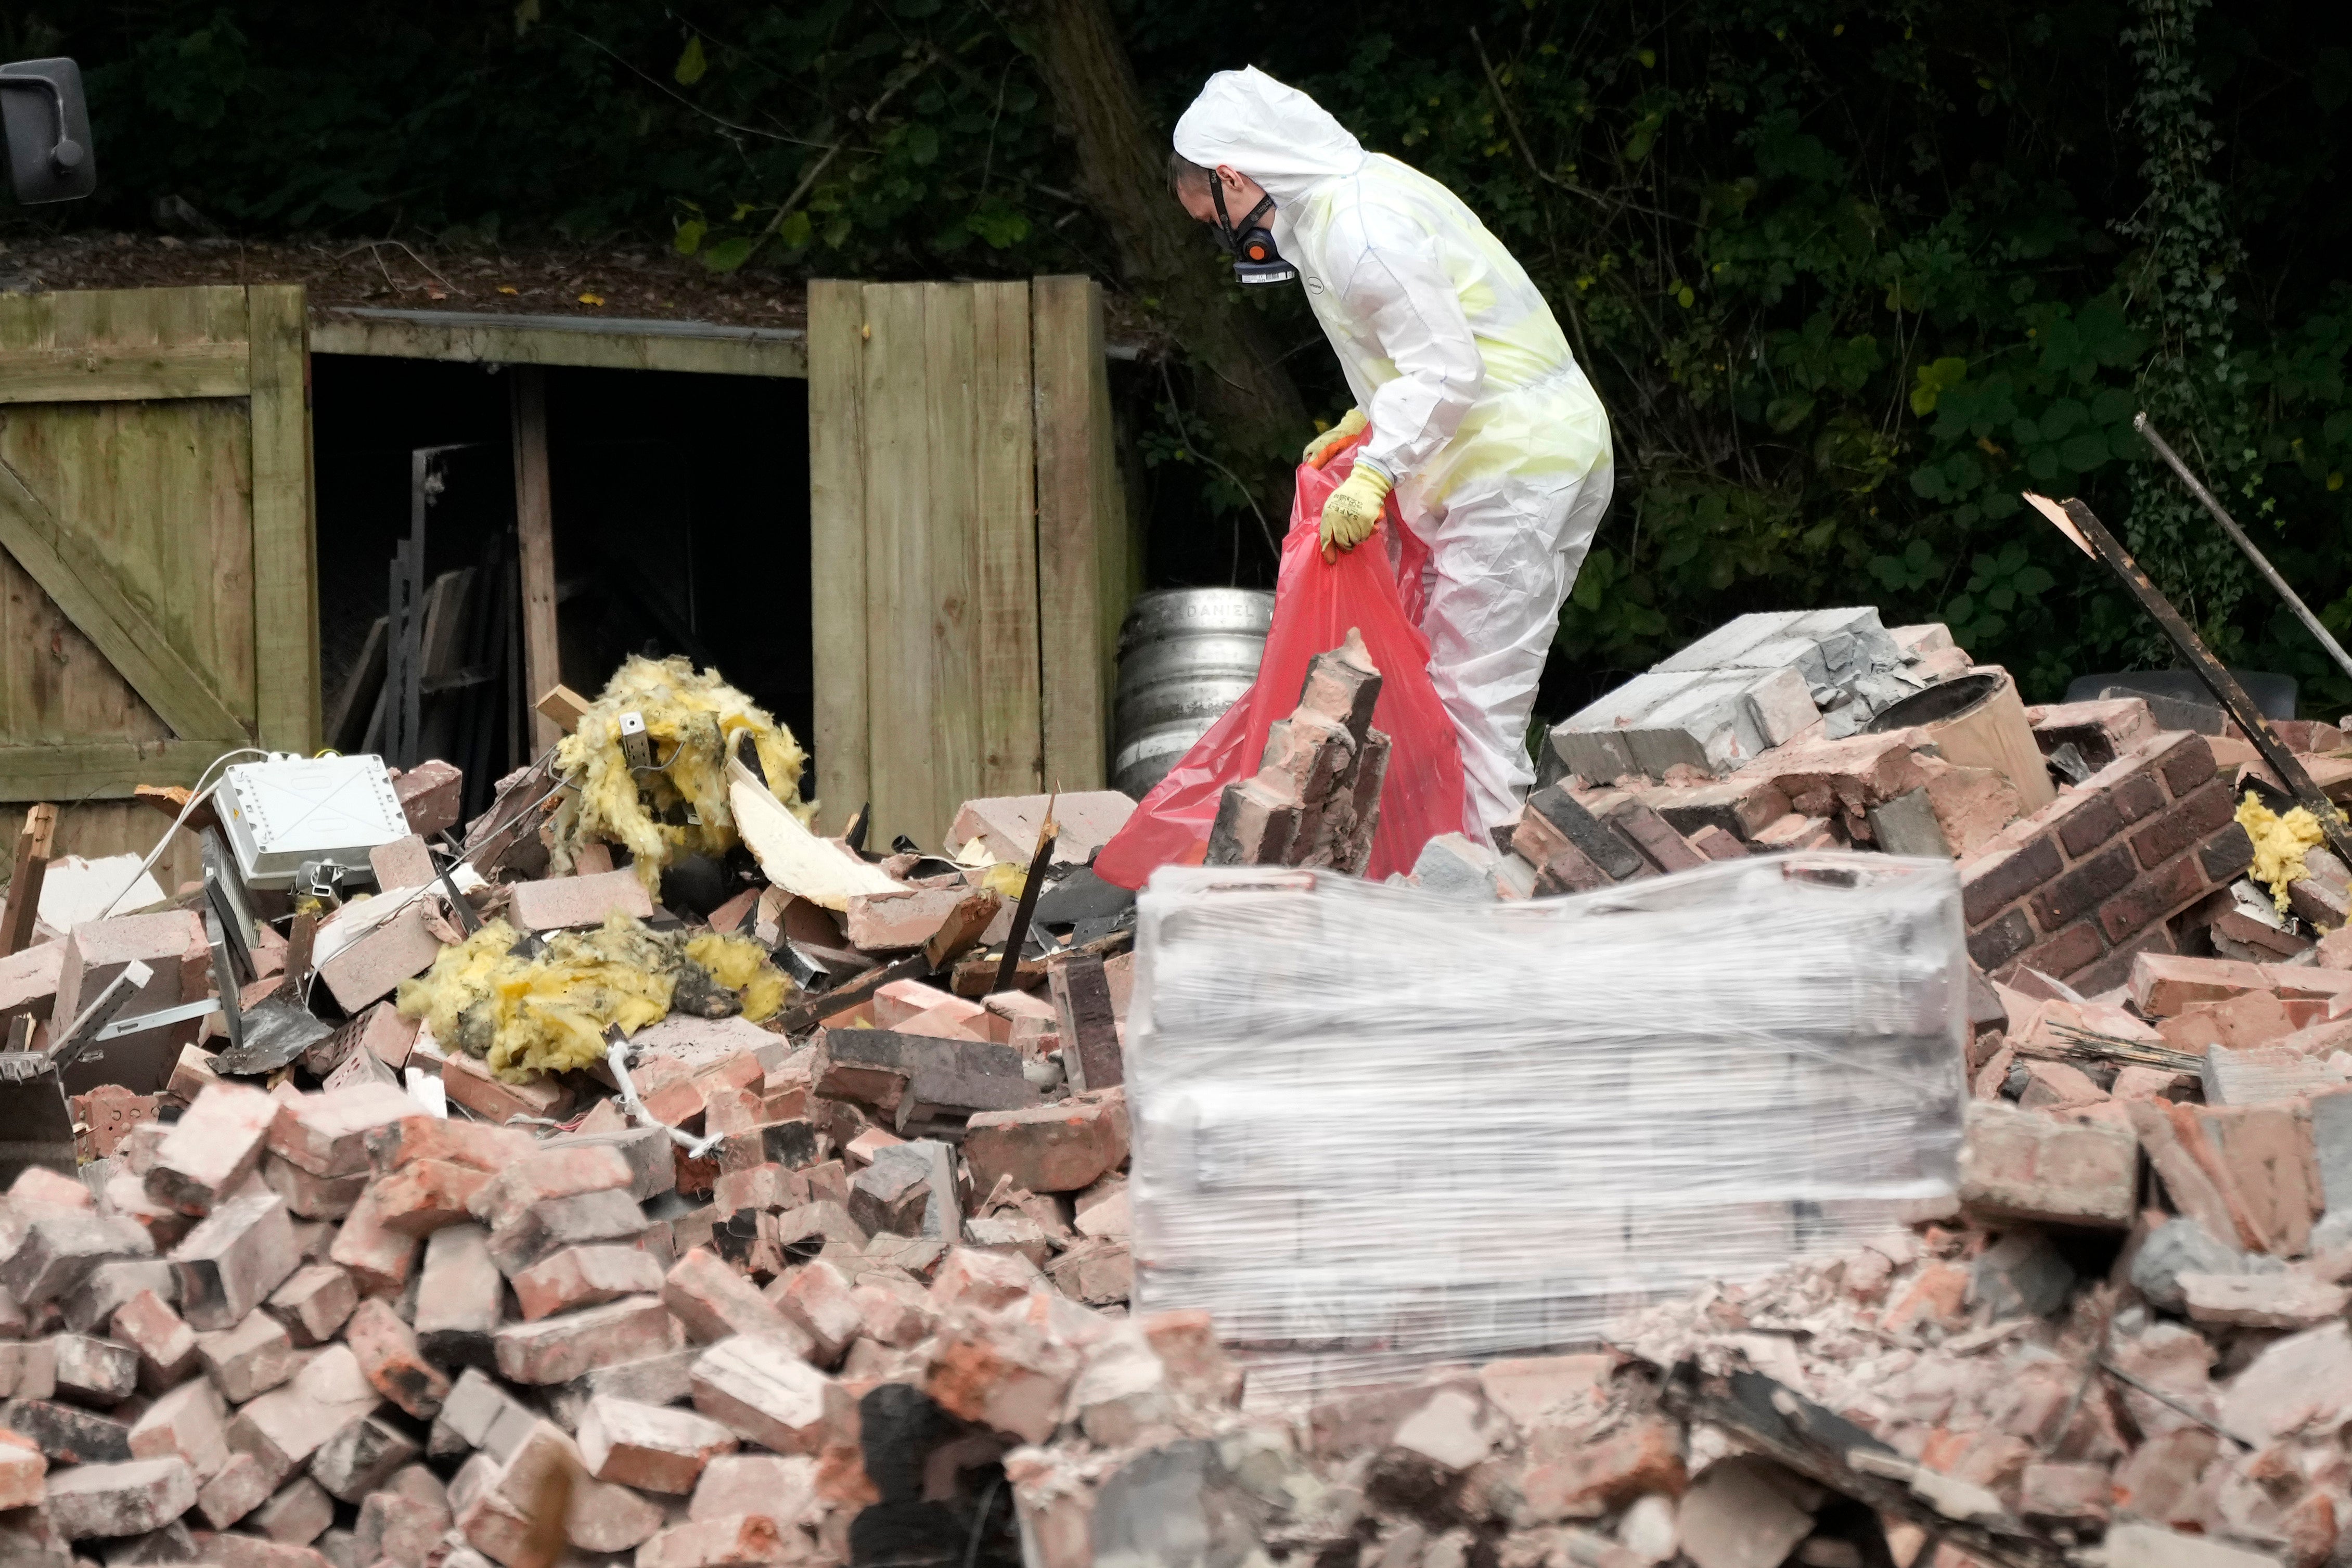 Workers remove dangerous materials from the ruins of the demolished Crooked House pub in August